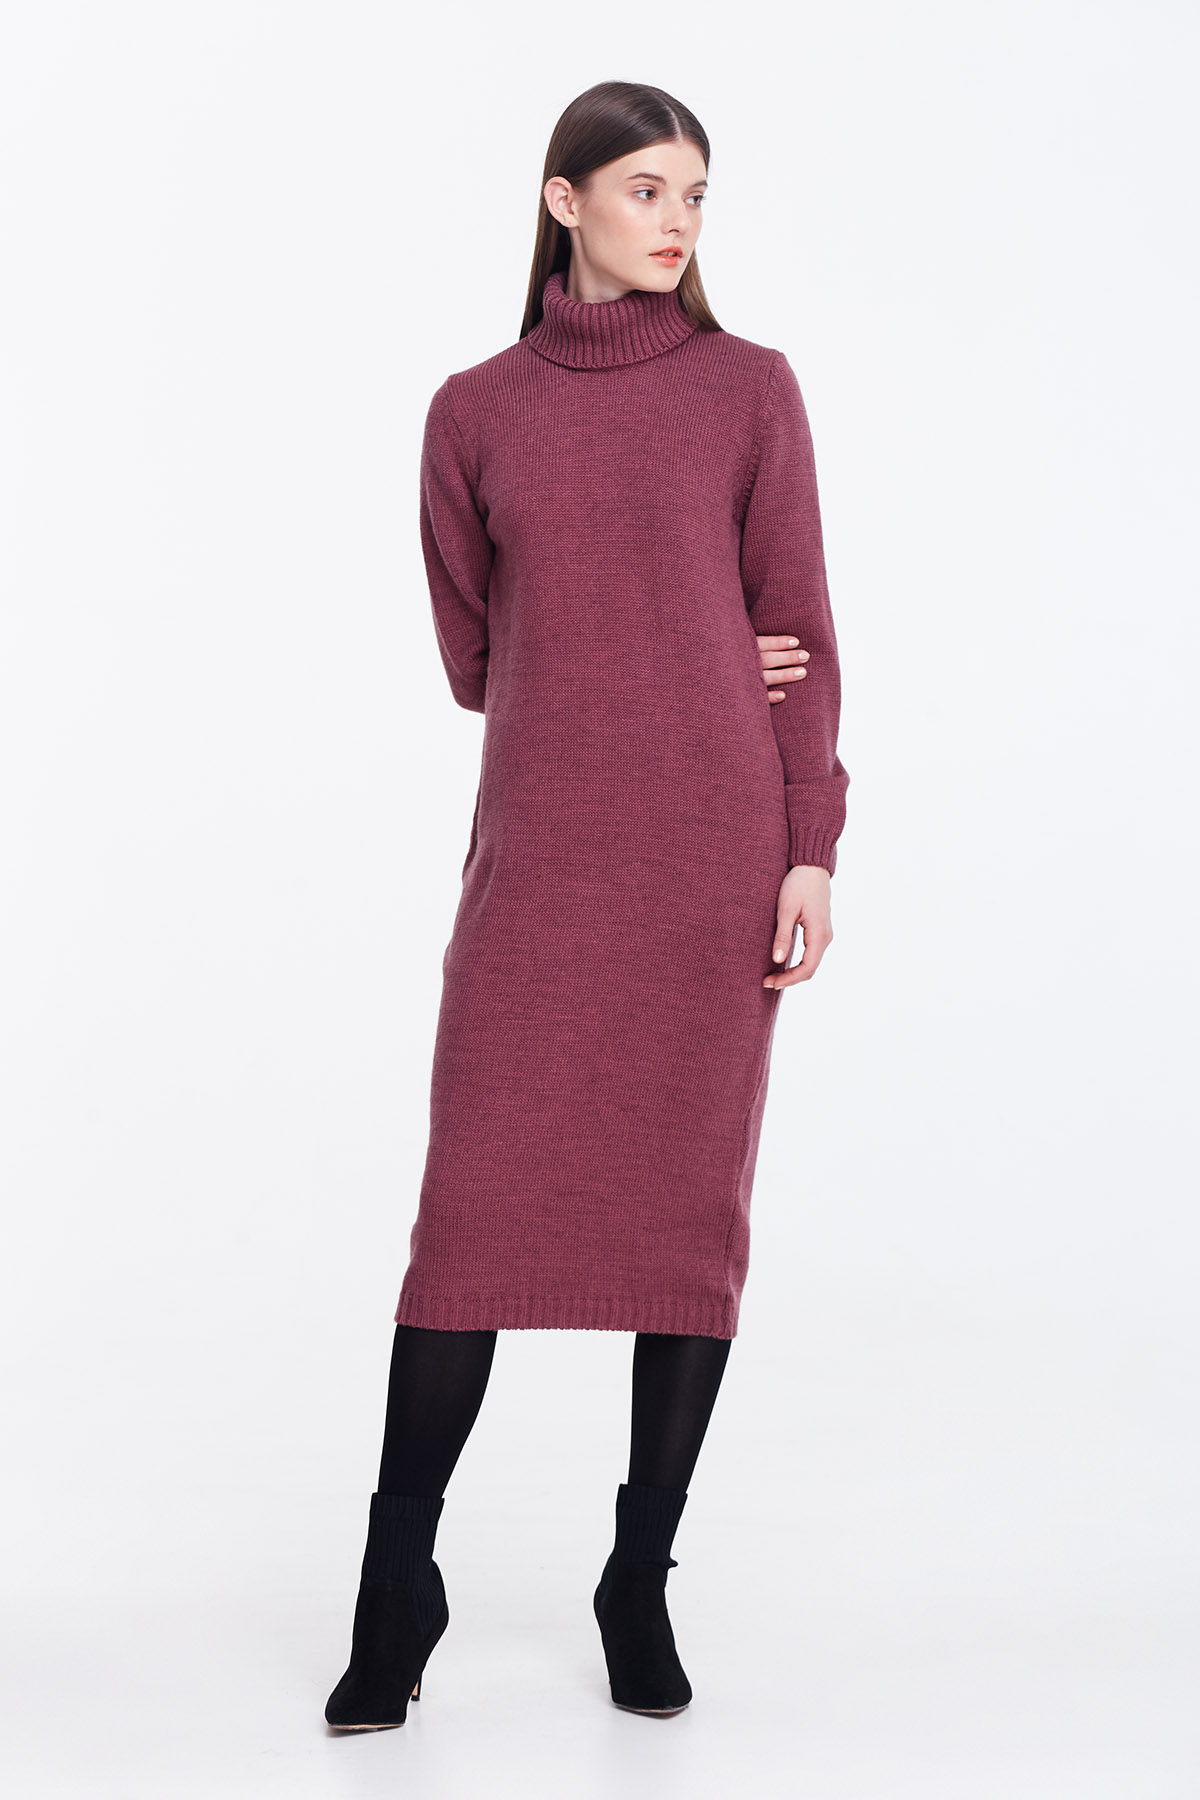 Wine knit dress with a stand up collar, photo 5